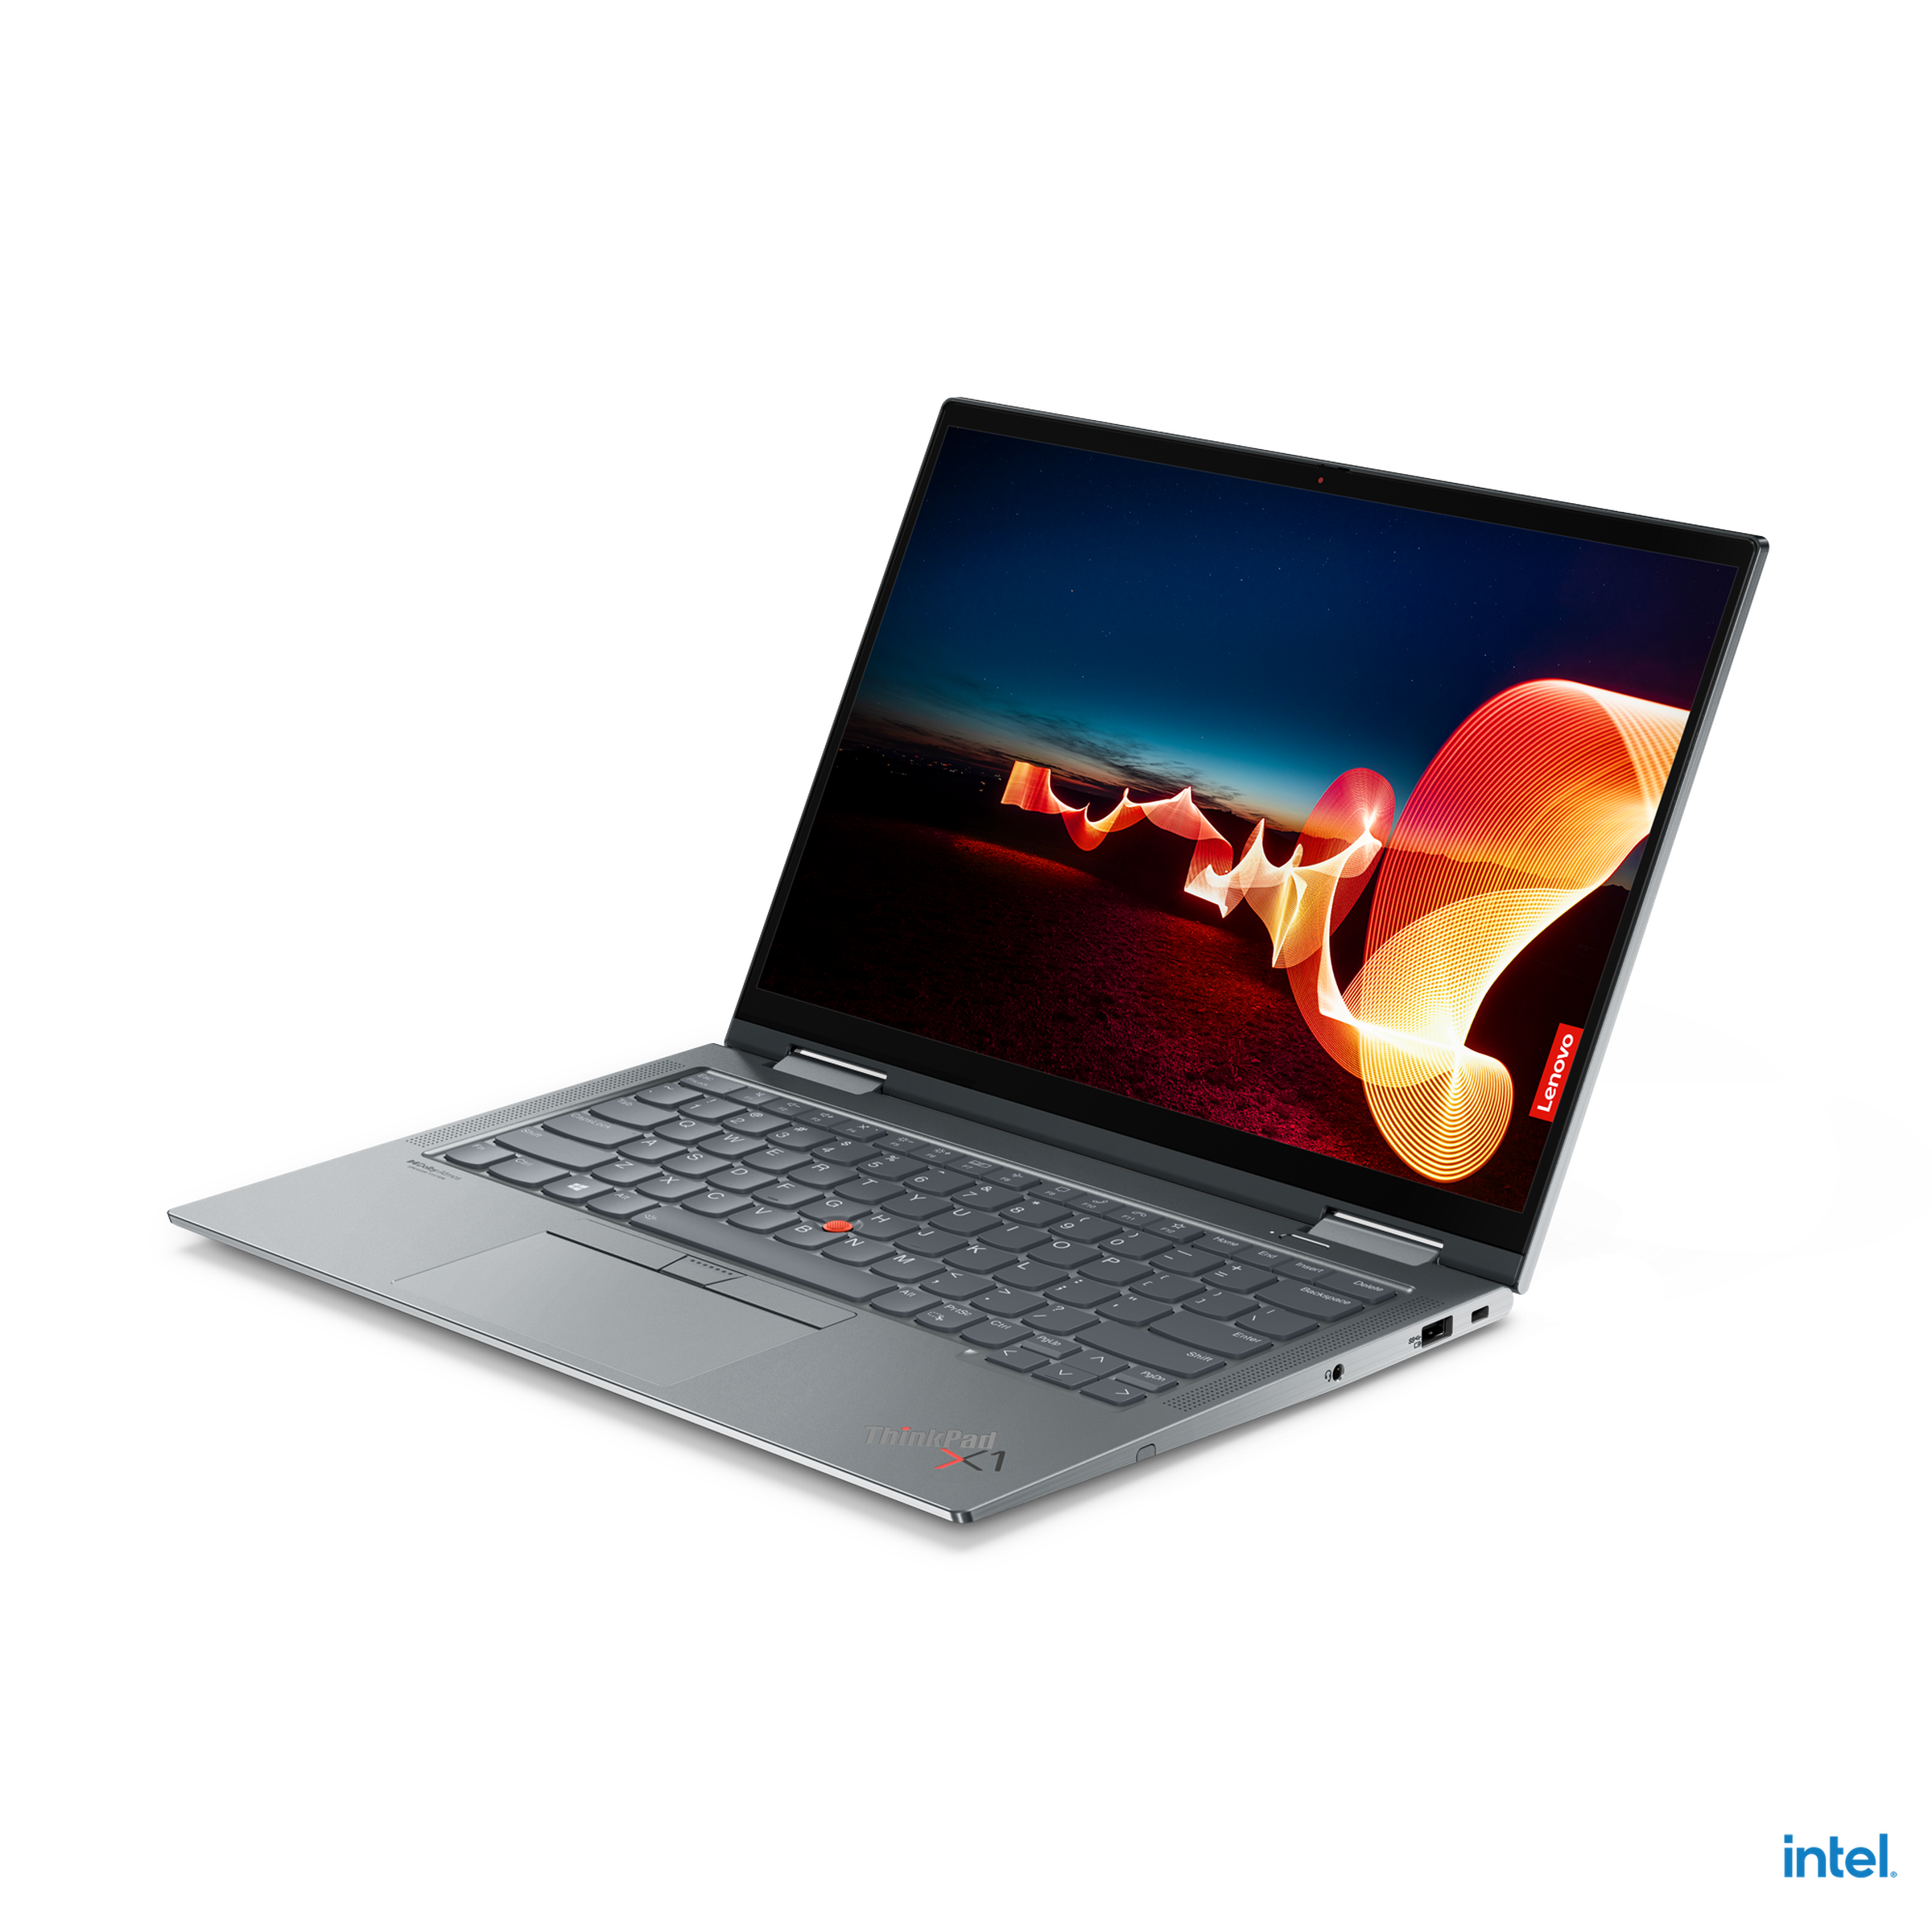 The X1 Yoga Gen 6 angled to the left side.